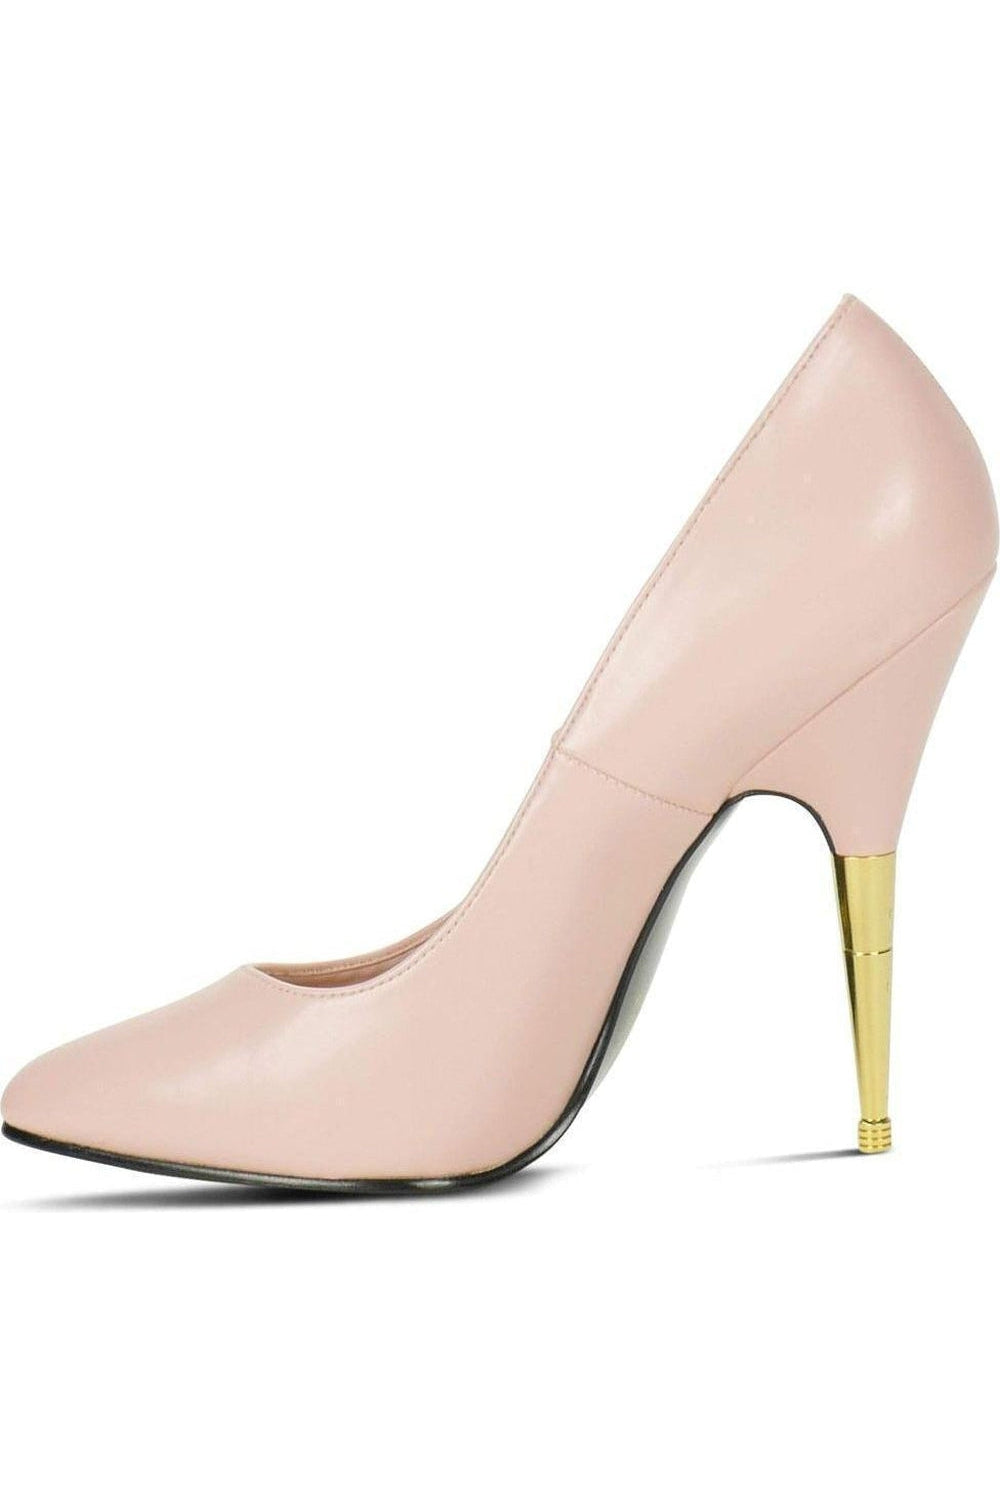 High Heel Metal Rod Pump- Pink Faux Leather-Sexyshoes Brand-Pumps-SEXYSHOES.COM